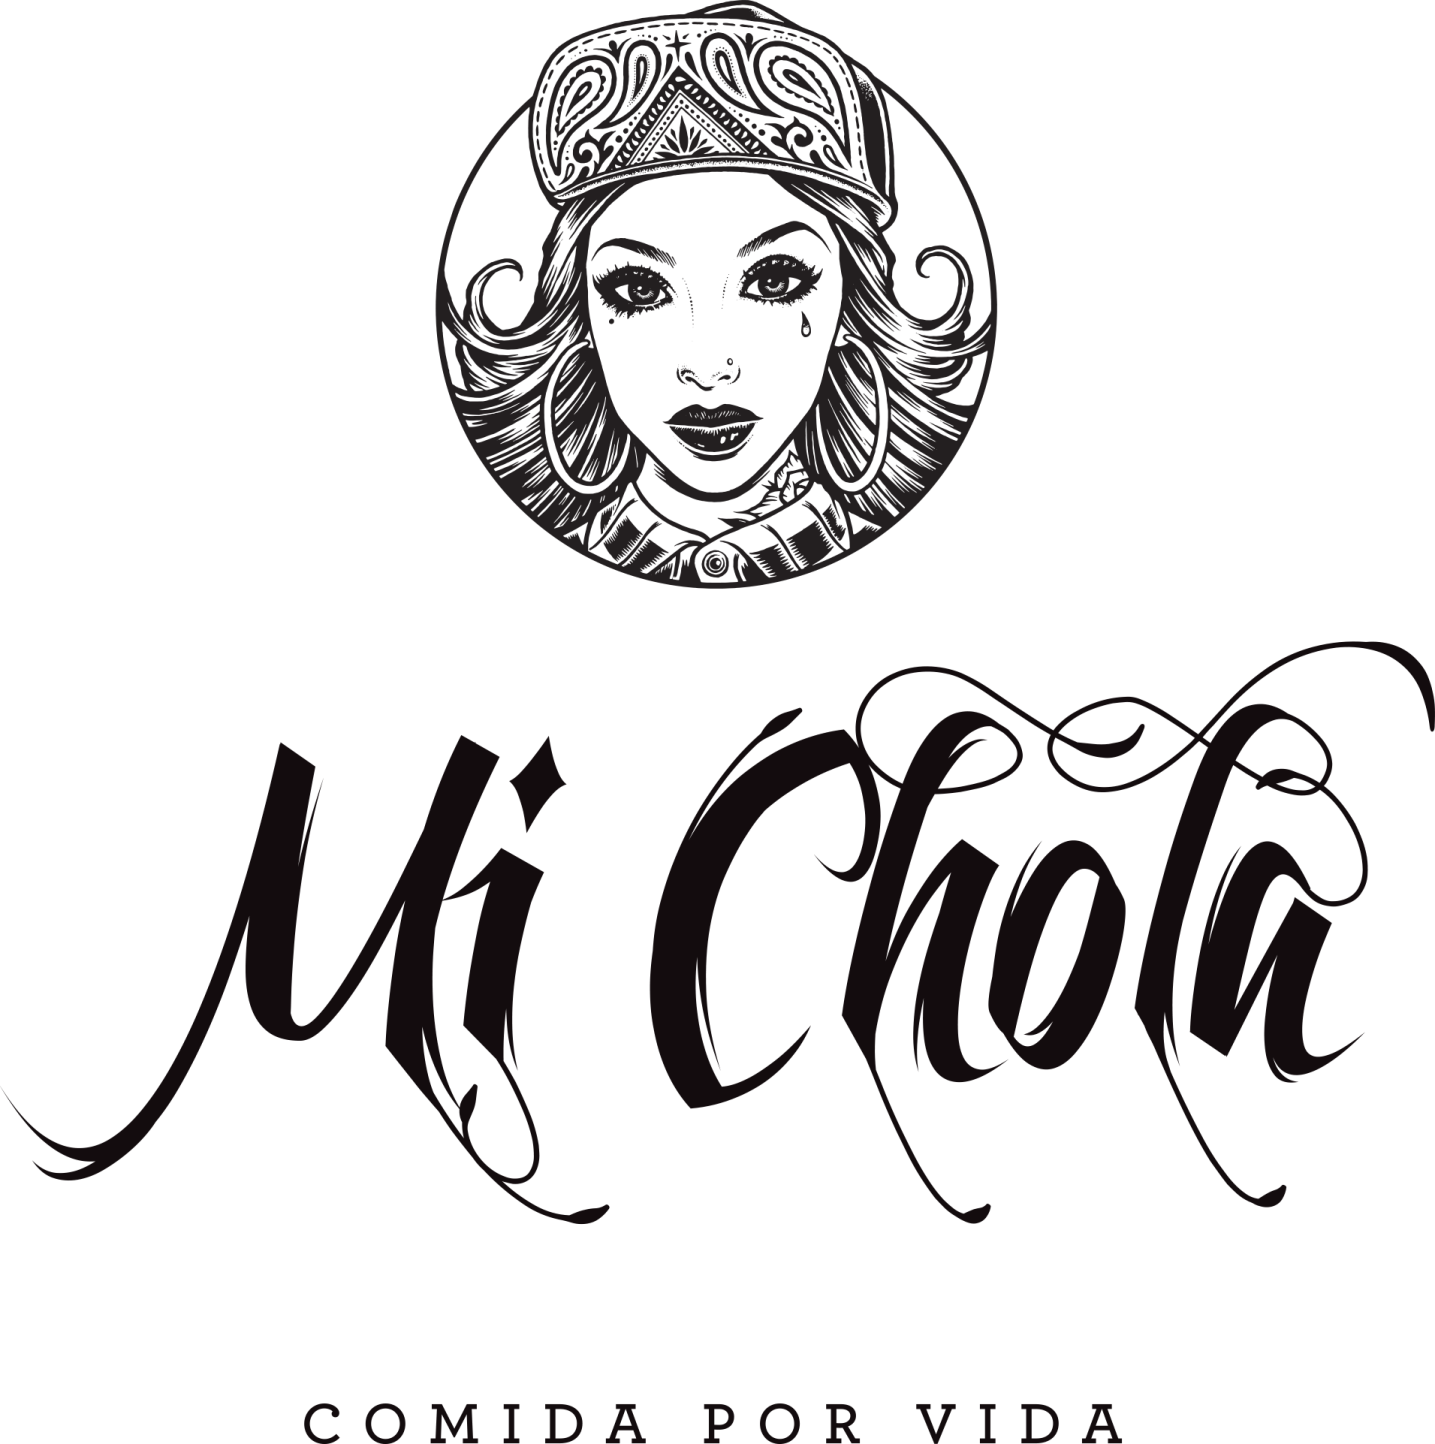 Chicano Cholo Chola Stickers for Sale | Redbubble